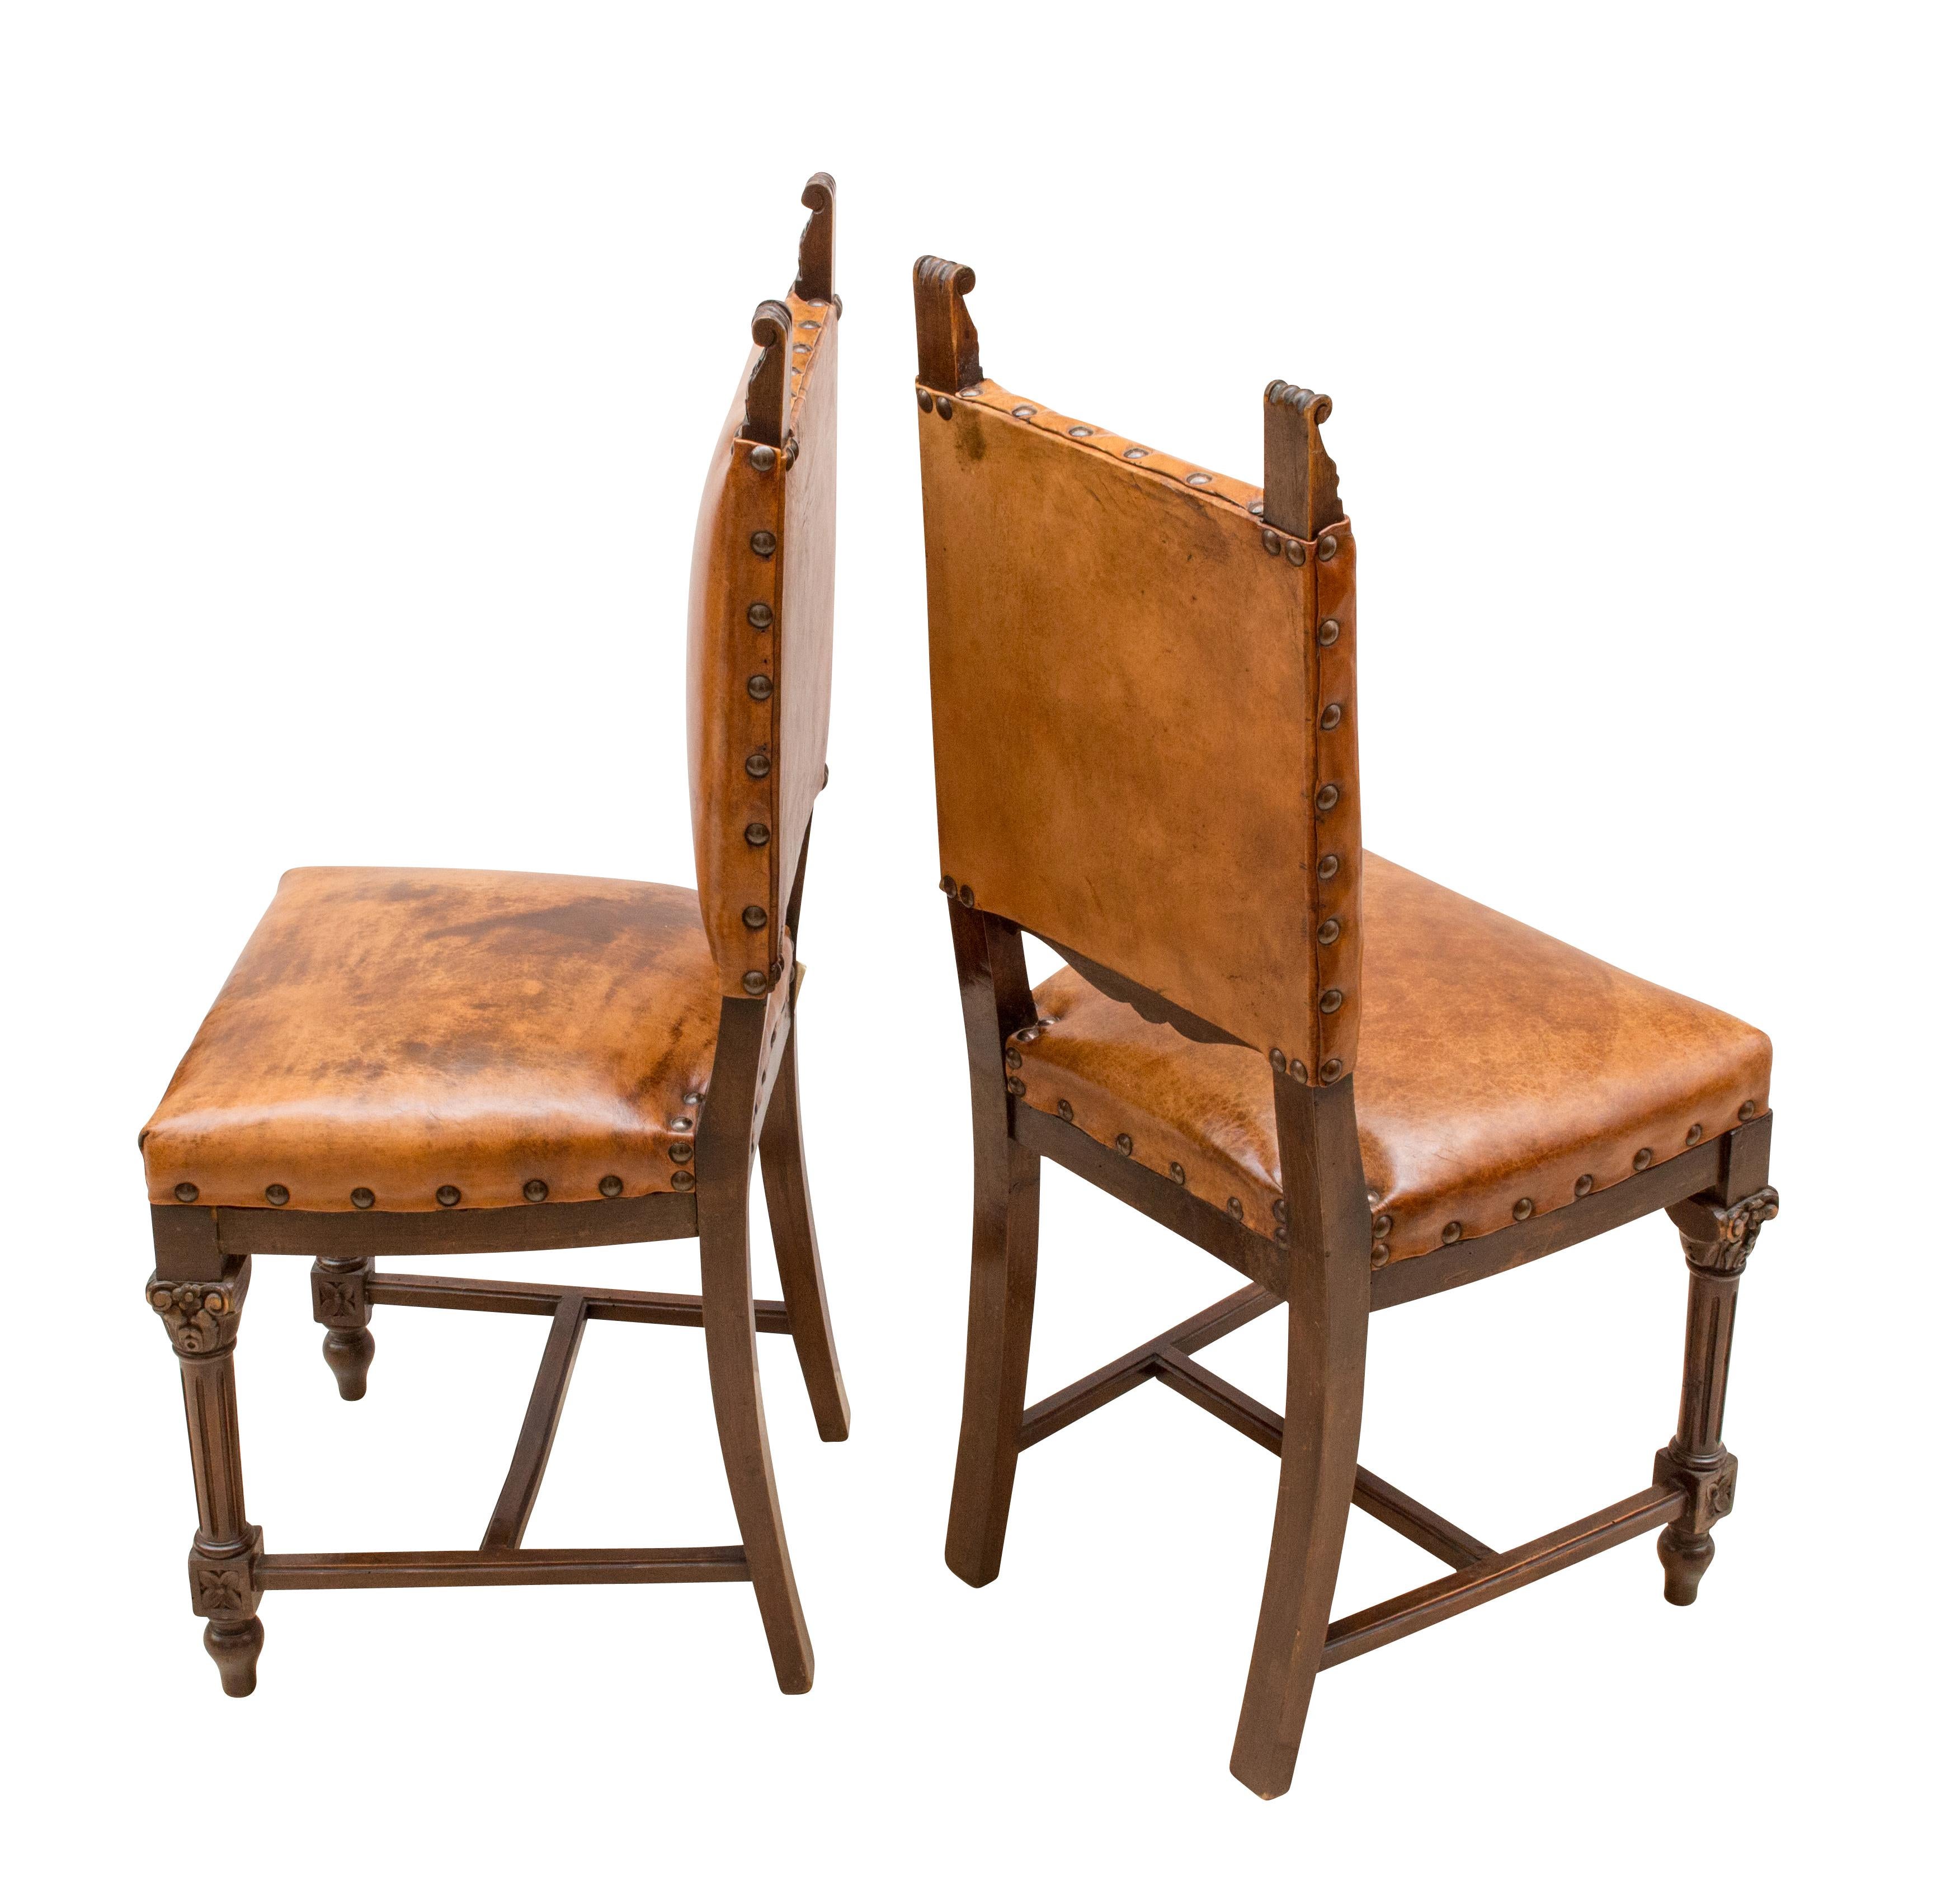 Two leather chairs from the time of 1870 (Gründerzeit) made of walnut and upholstered and covered with sheep leather. The leather is hand patinated.